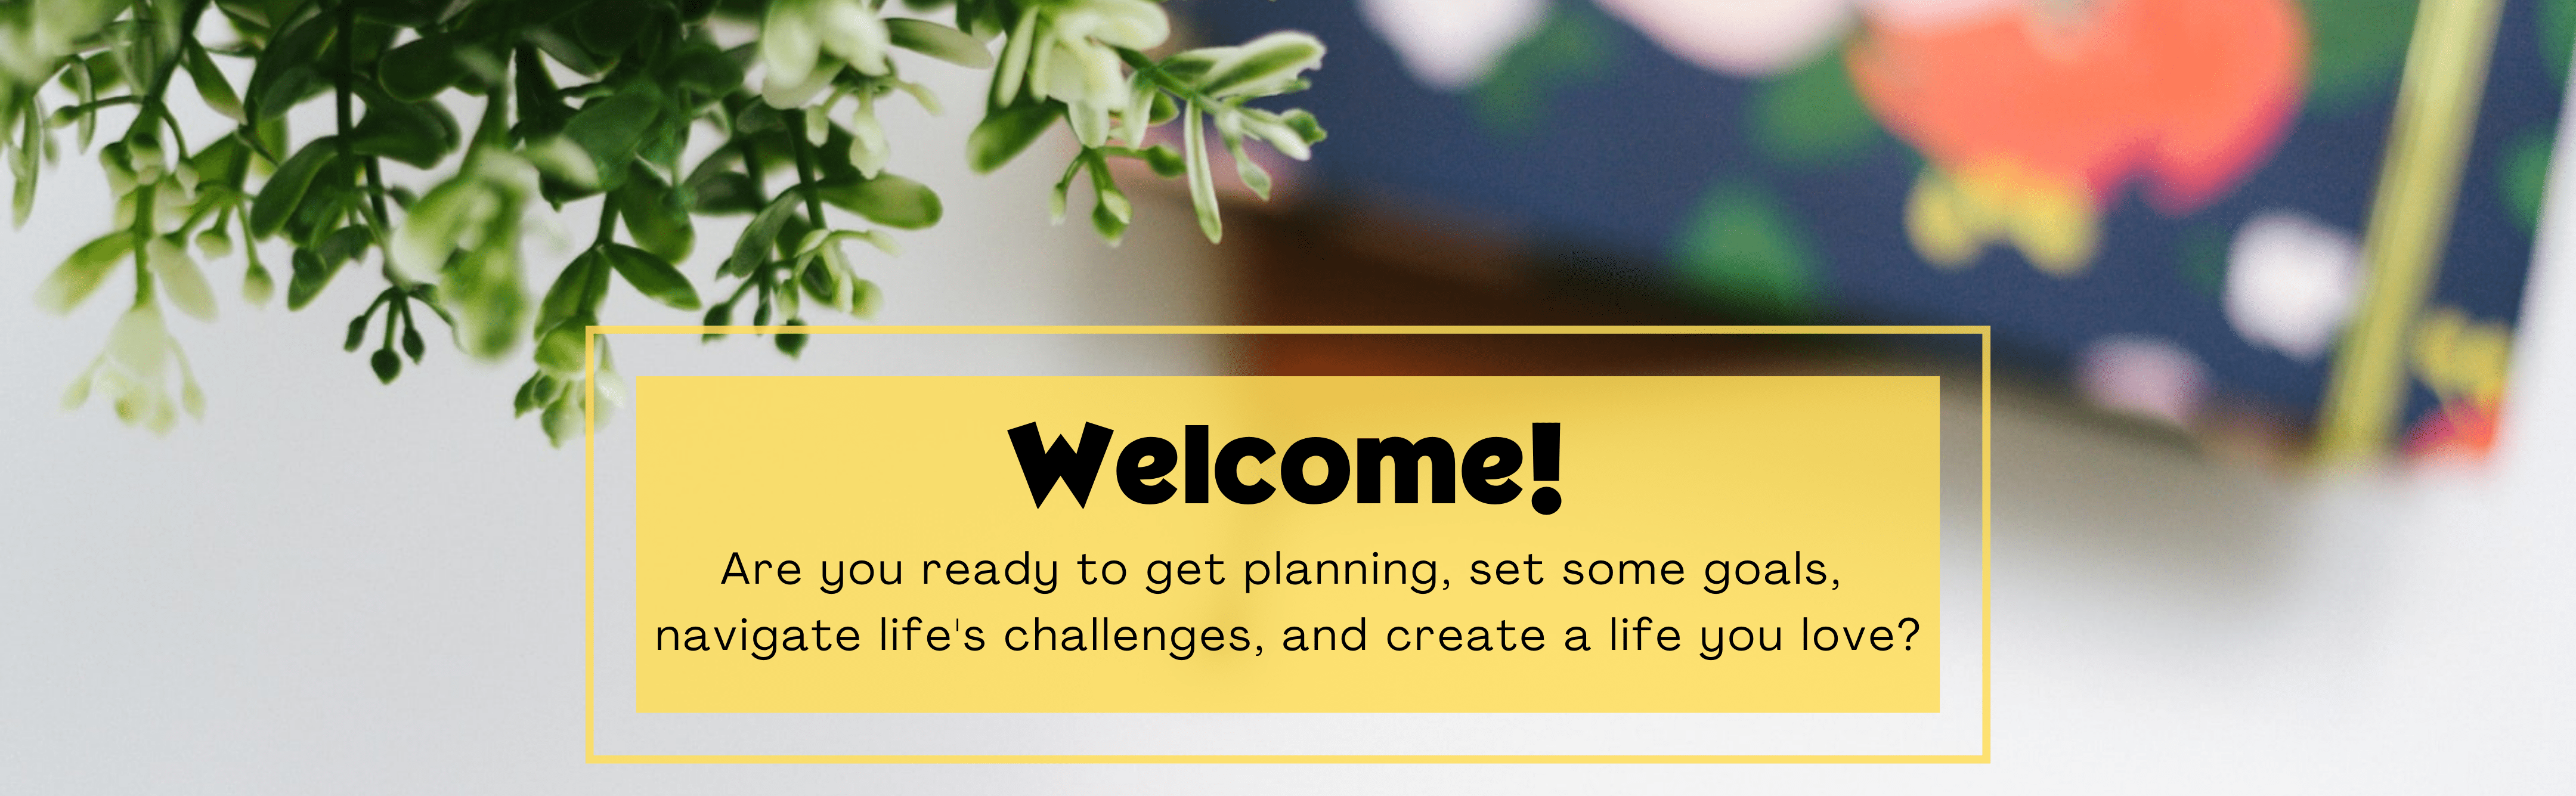 Welcome to Plan and Bloom! Are you ready to get planning, set some goals,  navigate life's challenges, and create a life you love? You're in the right place.